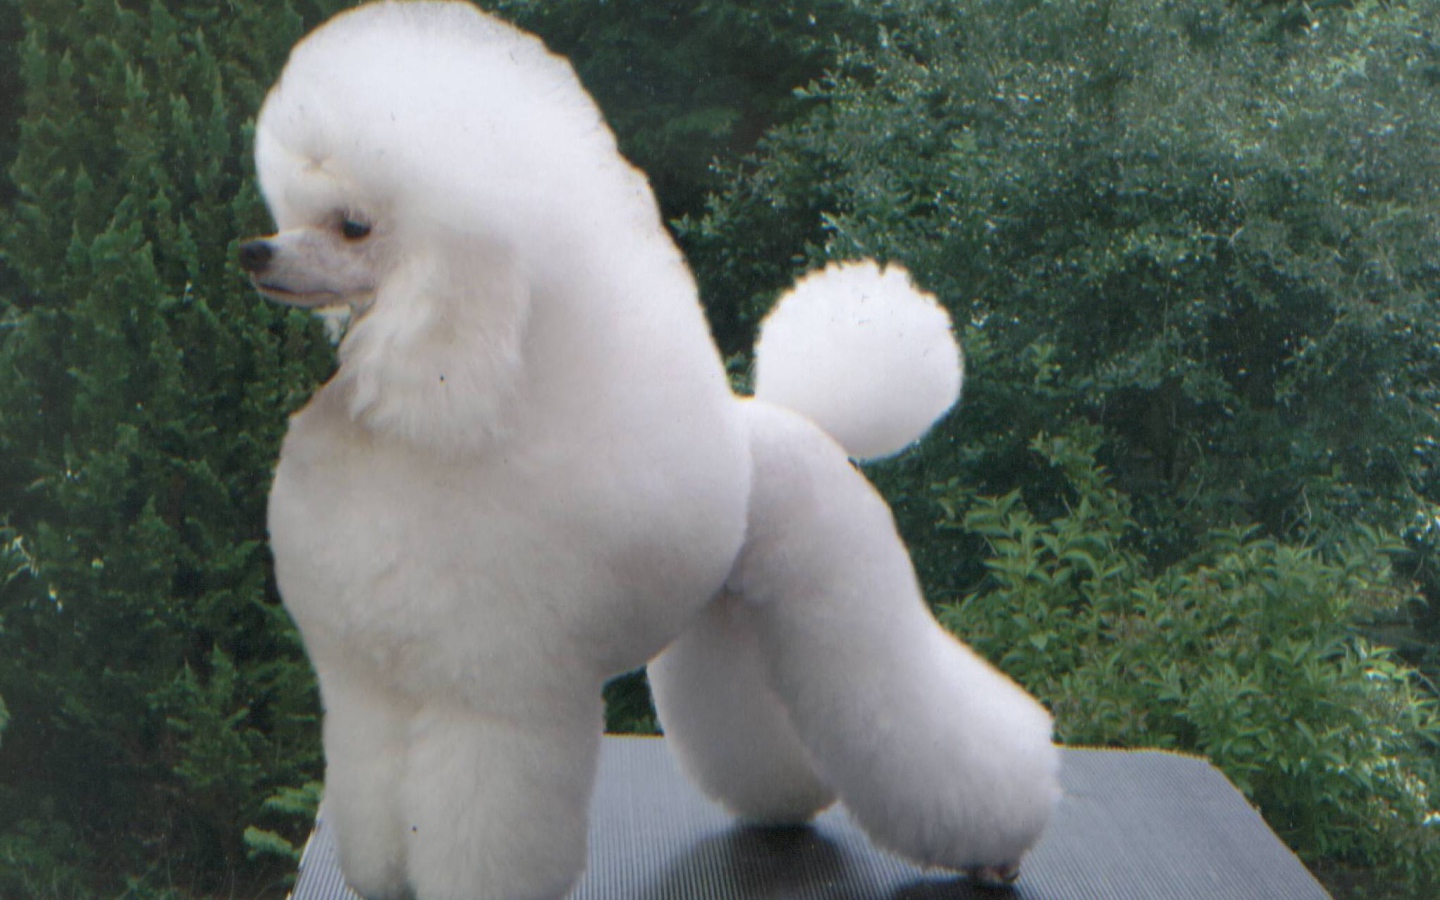 fluffy white poodle